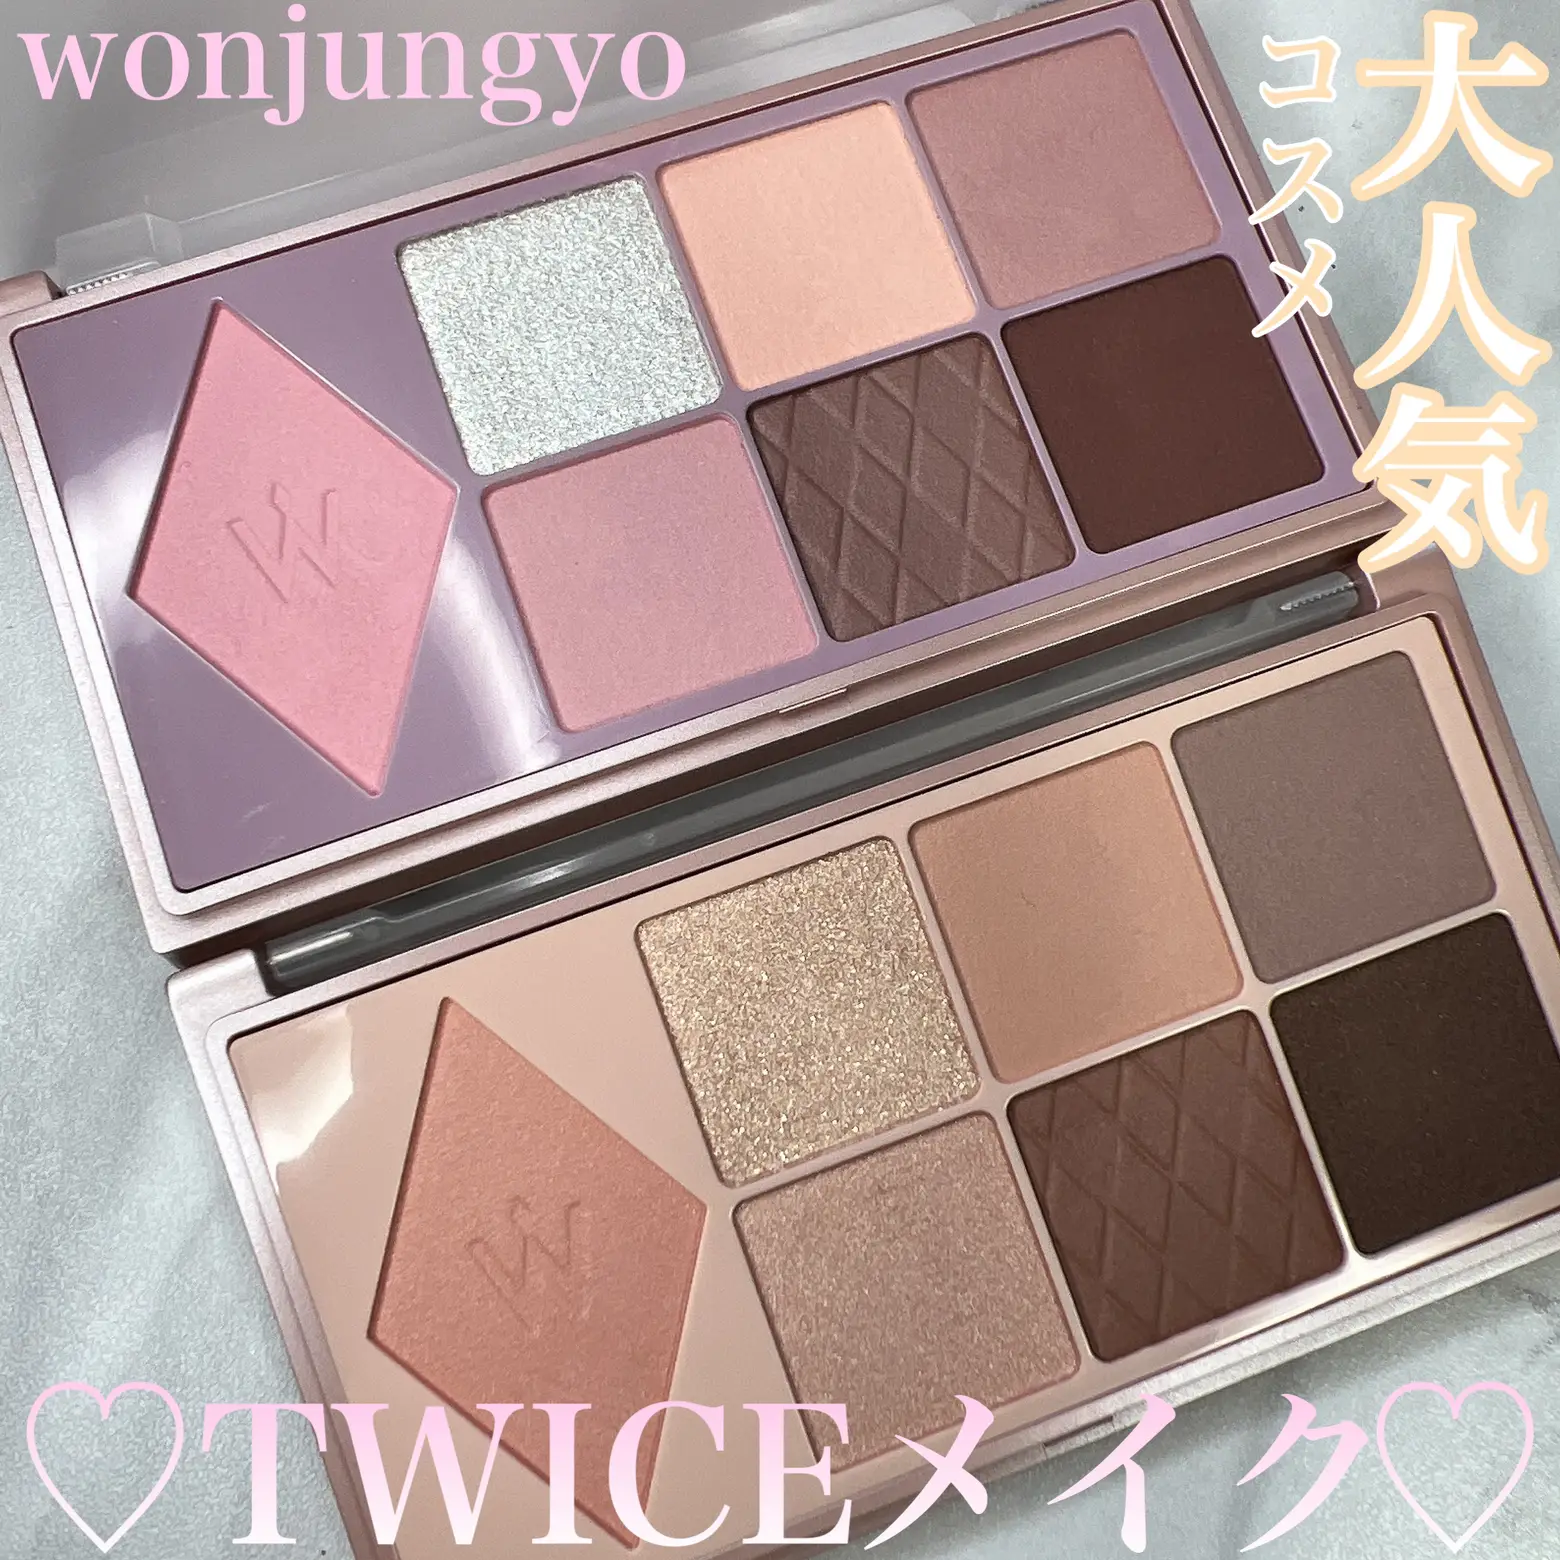 wonjungyo W Daily Mood | posted by Review✨ Gallery Up | Lemon8 Ran♡ Palette